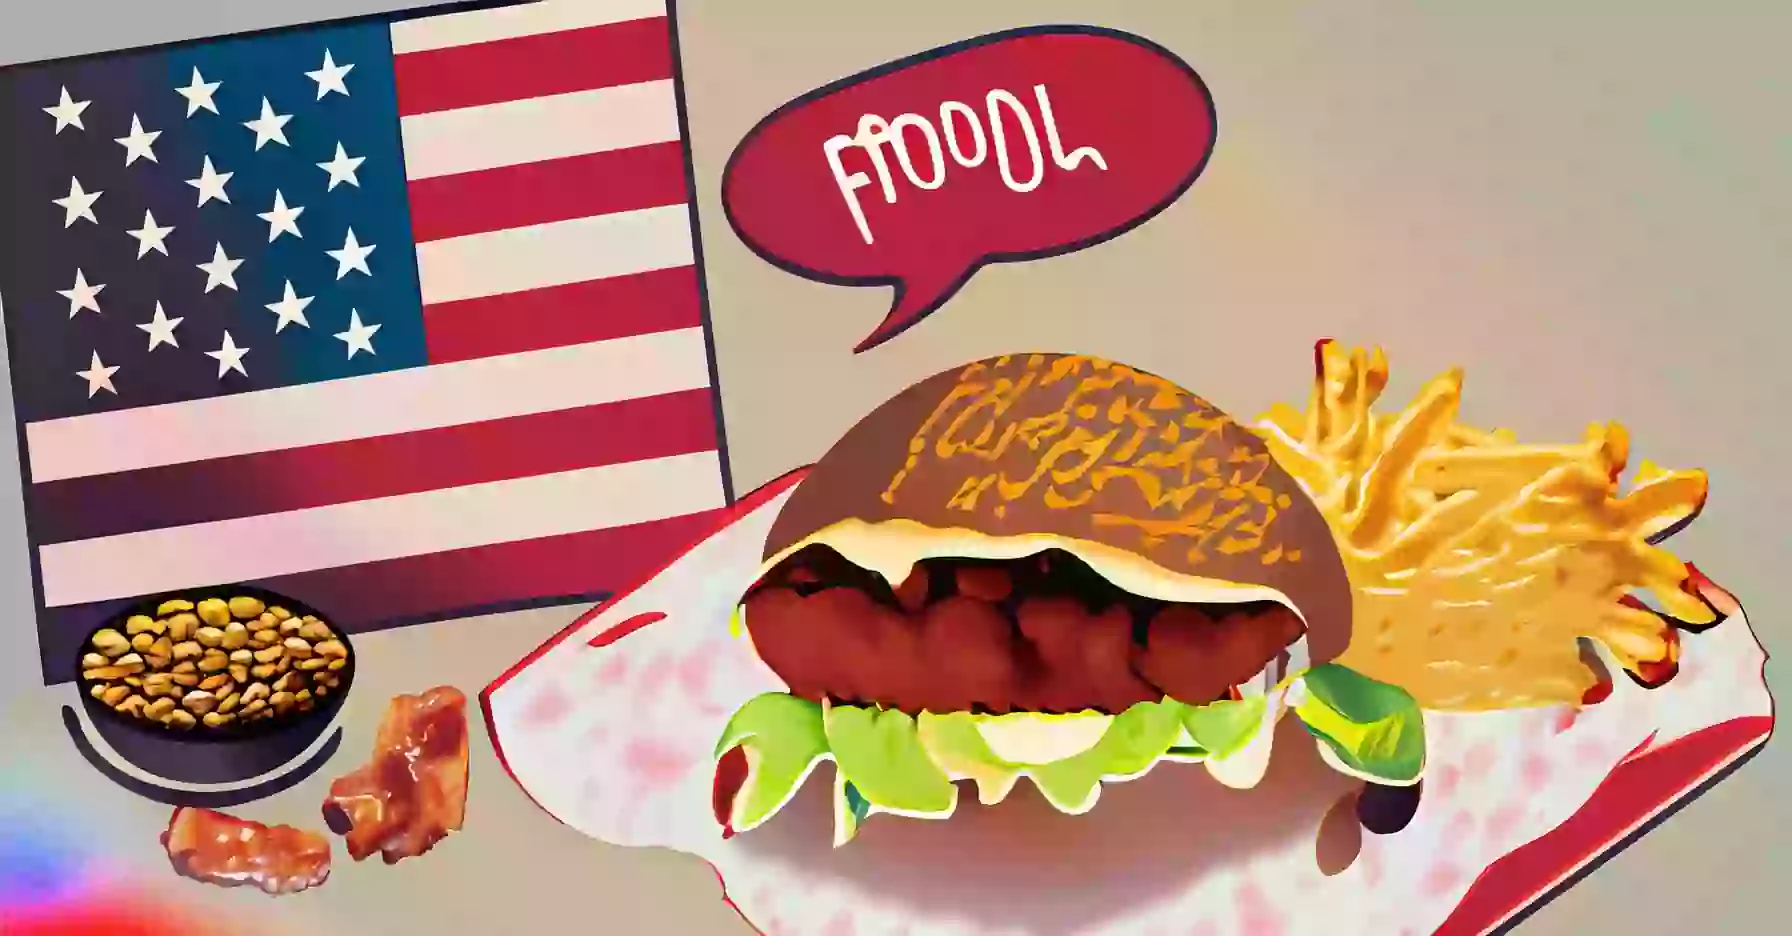 What Food is the USA known For?